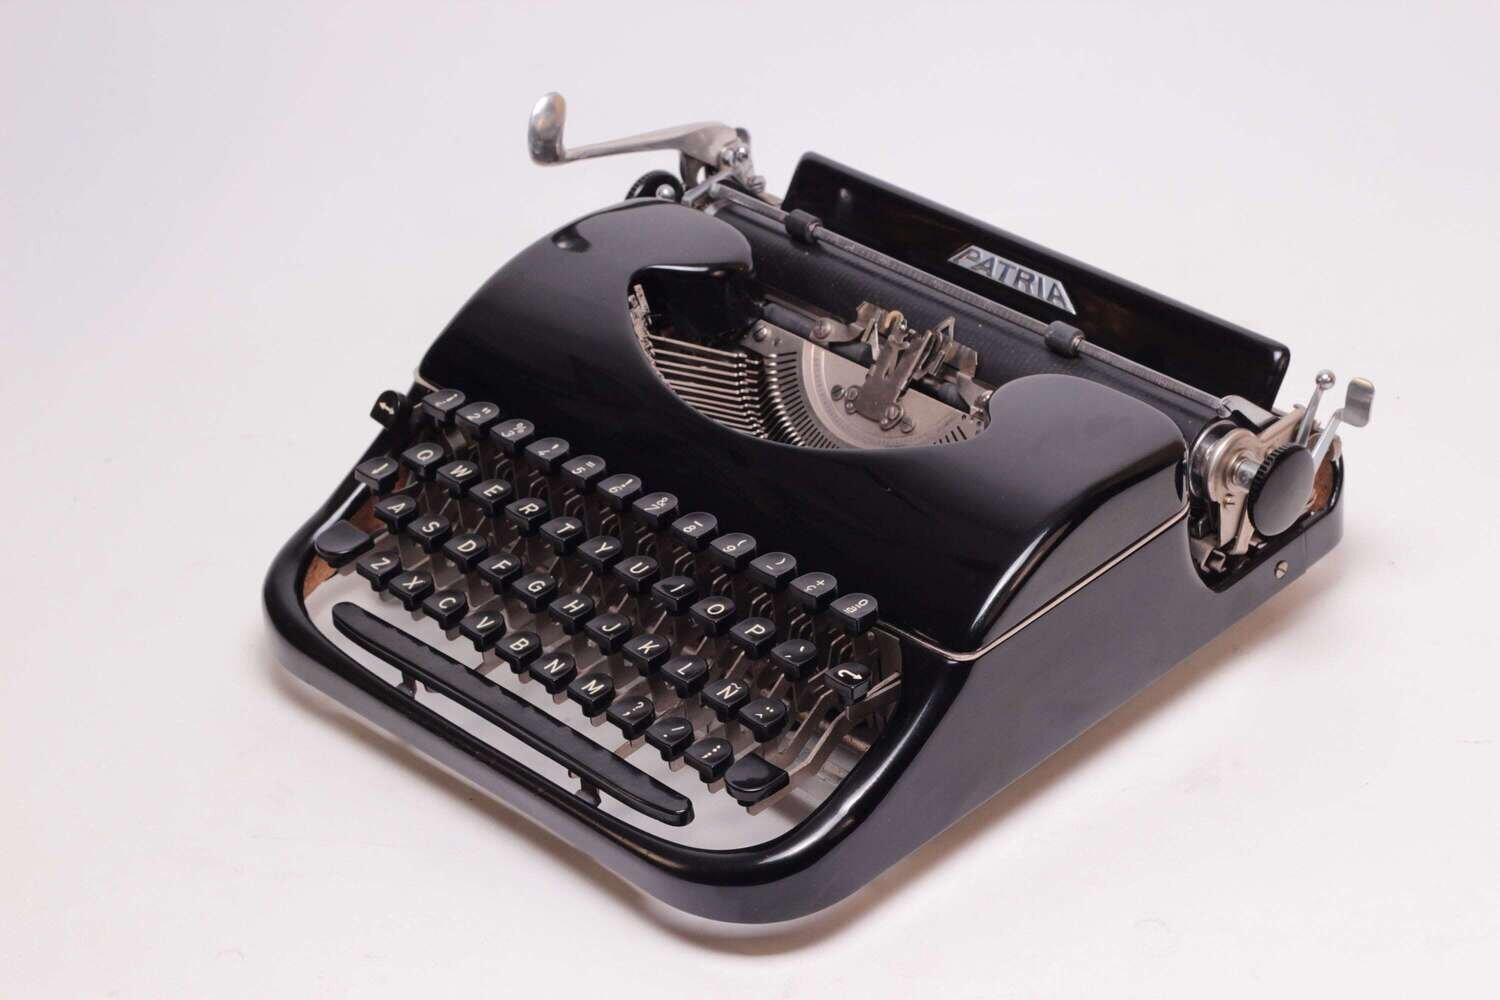 Limited Edition Patria Black Typewriter, Vintage, Mint Condition, Manual Portable, Professionally Serviced by Typewriter.Company